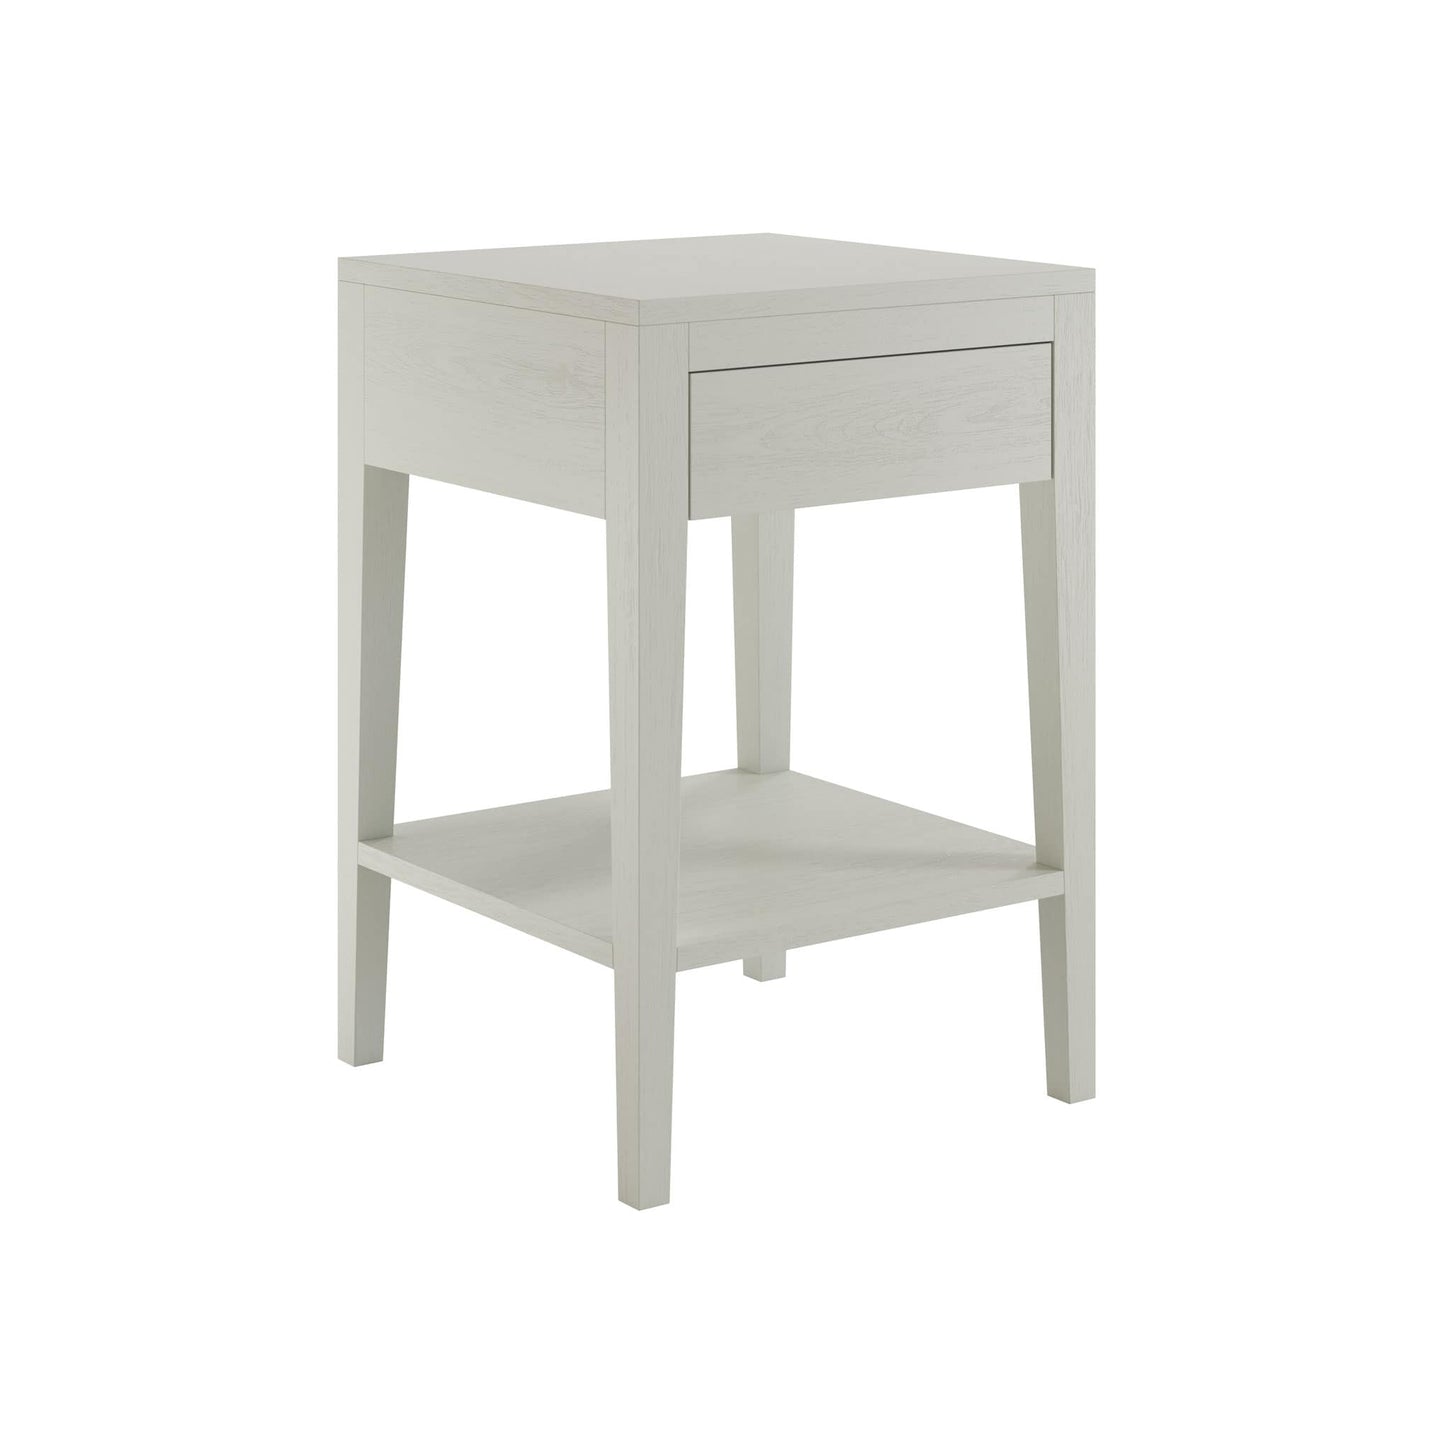 Grey Cheriton One Drawer Bedside Table